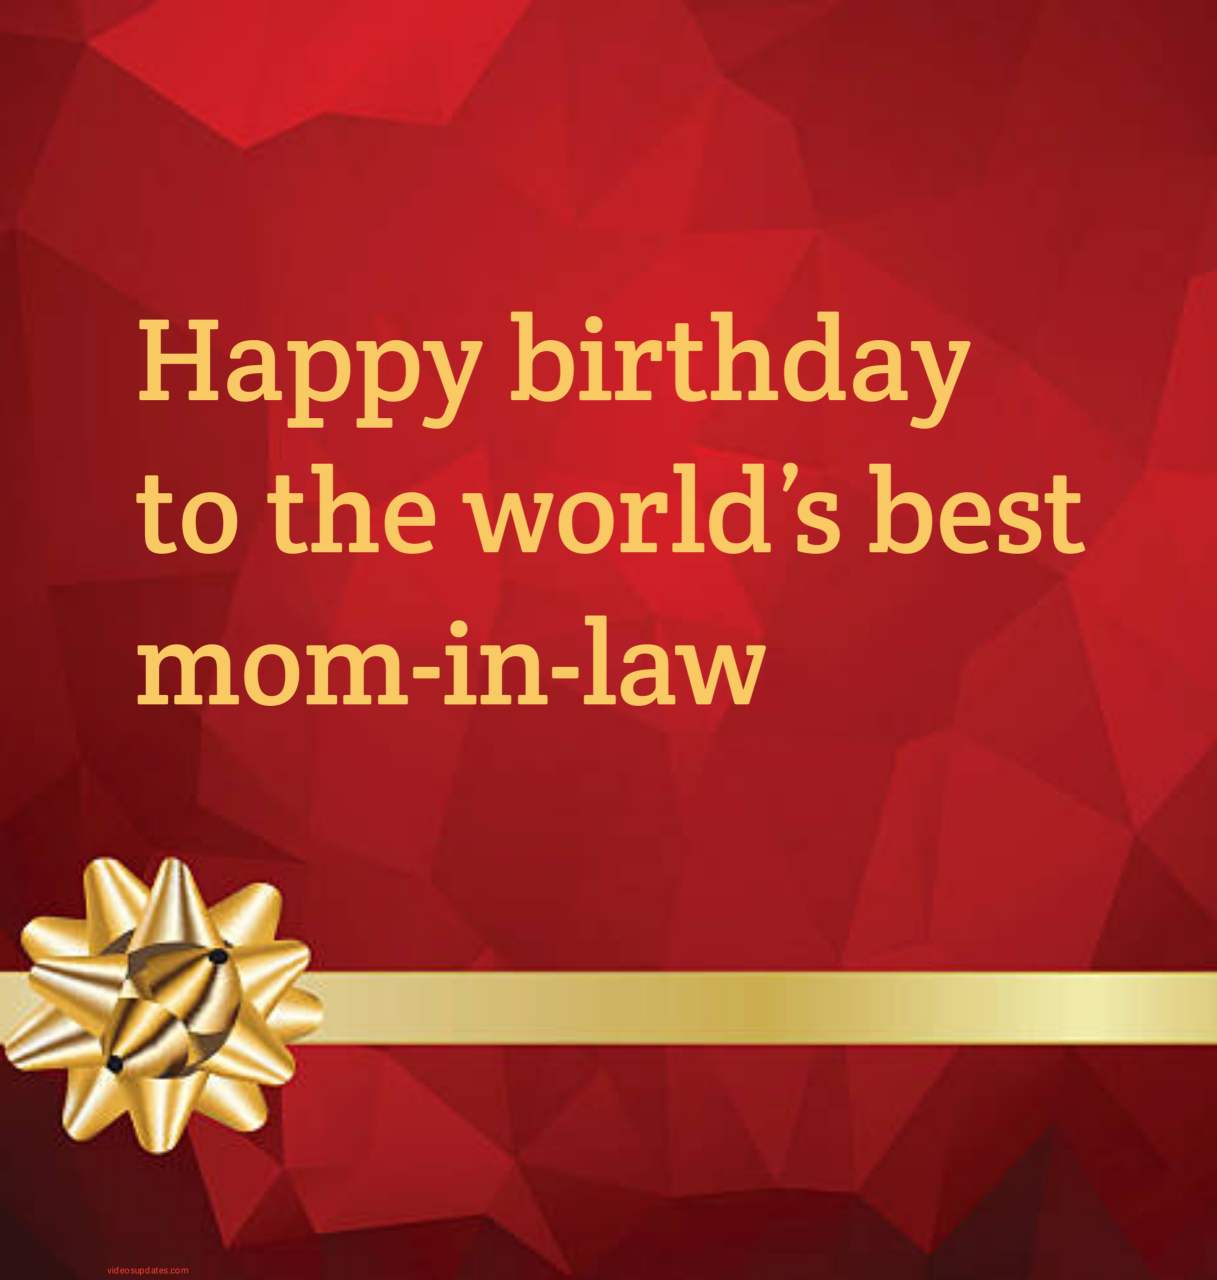 https://videosupdates.com/birthday-wishes-for-mother-in-law/